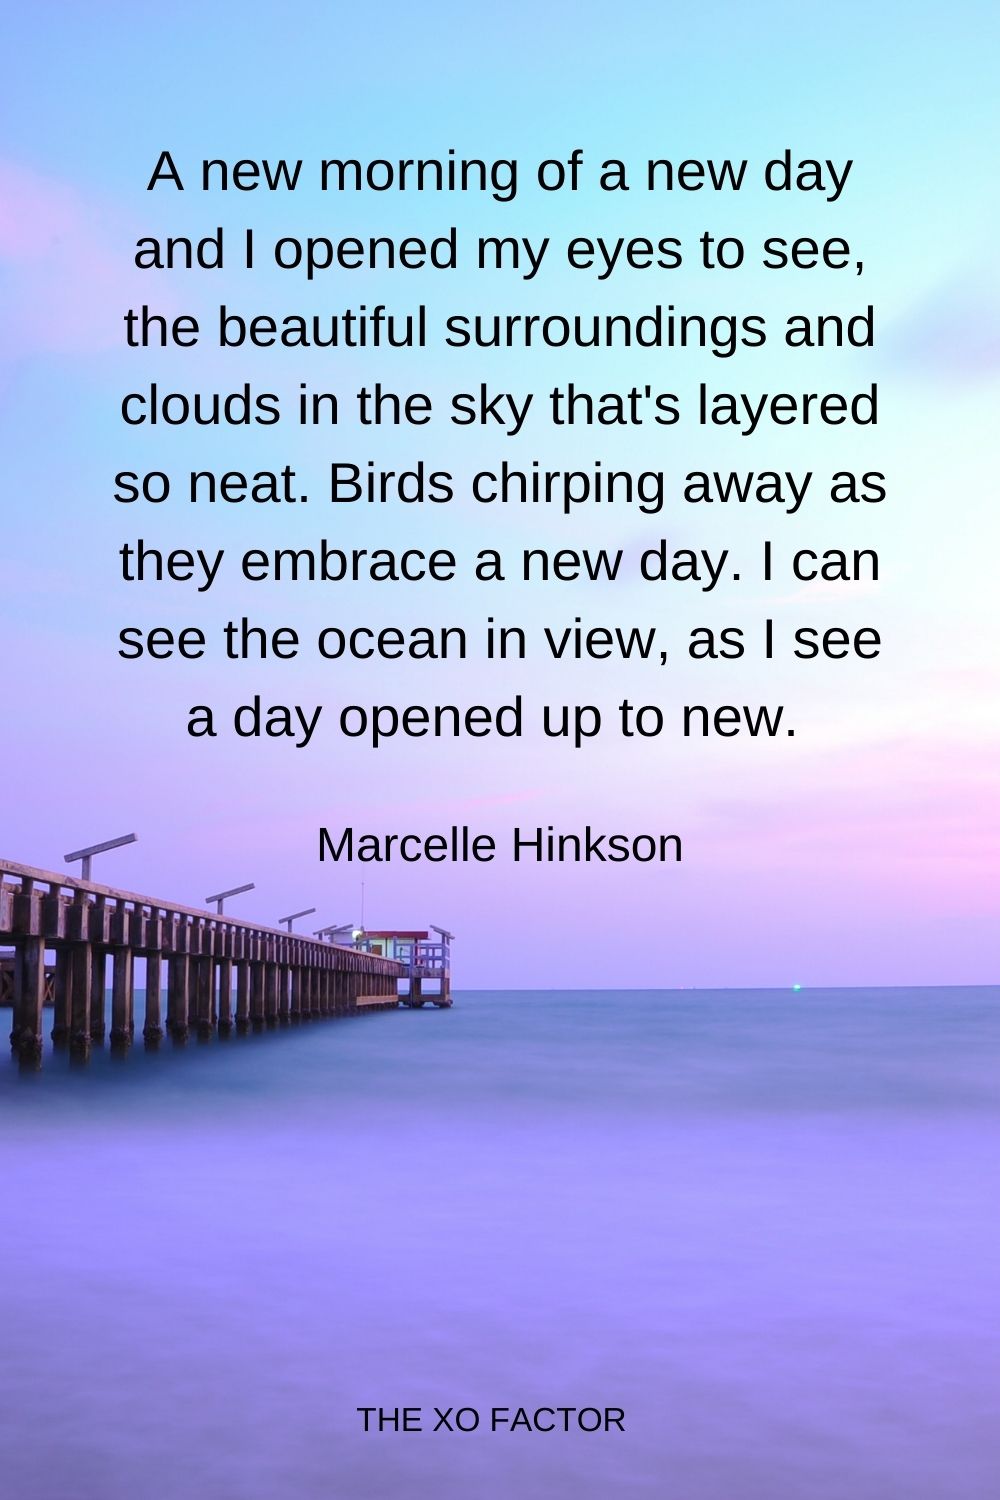 A new morning of a new day and I opened my eyes to see, the beautiful surroundings and clouds in the sky that's layered so neat. Birds chirping away as they embrace a new day. I can see the ocean in view, as I see a day opened up to new.  Marcelle Hinkson